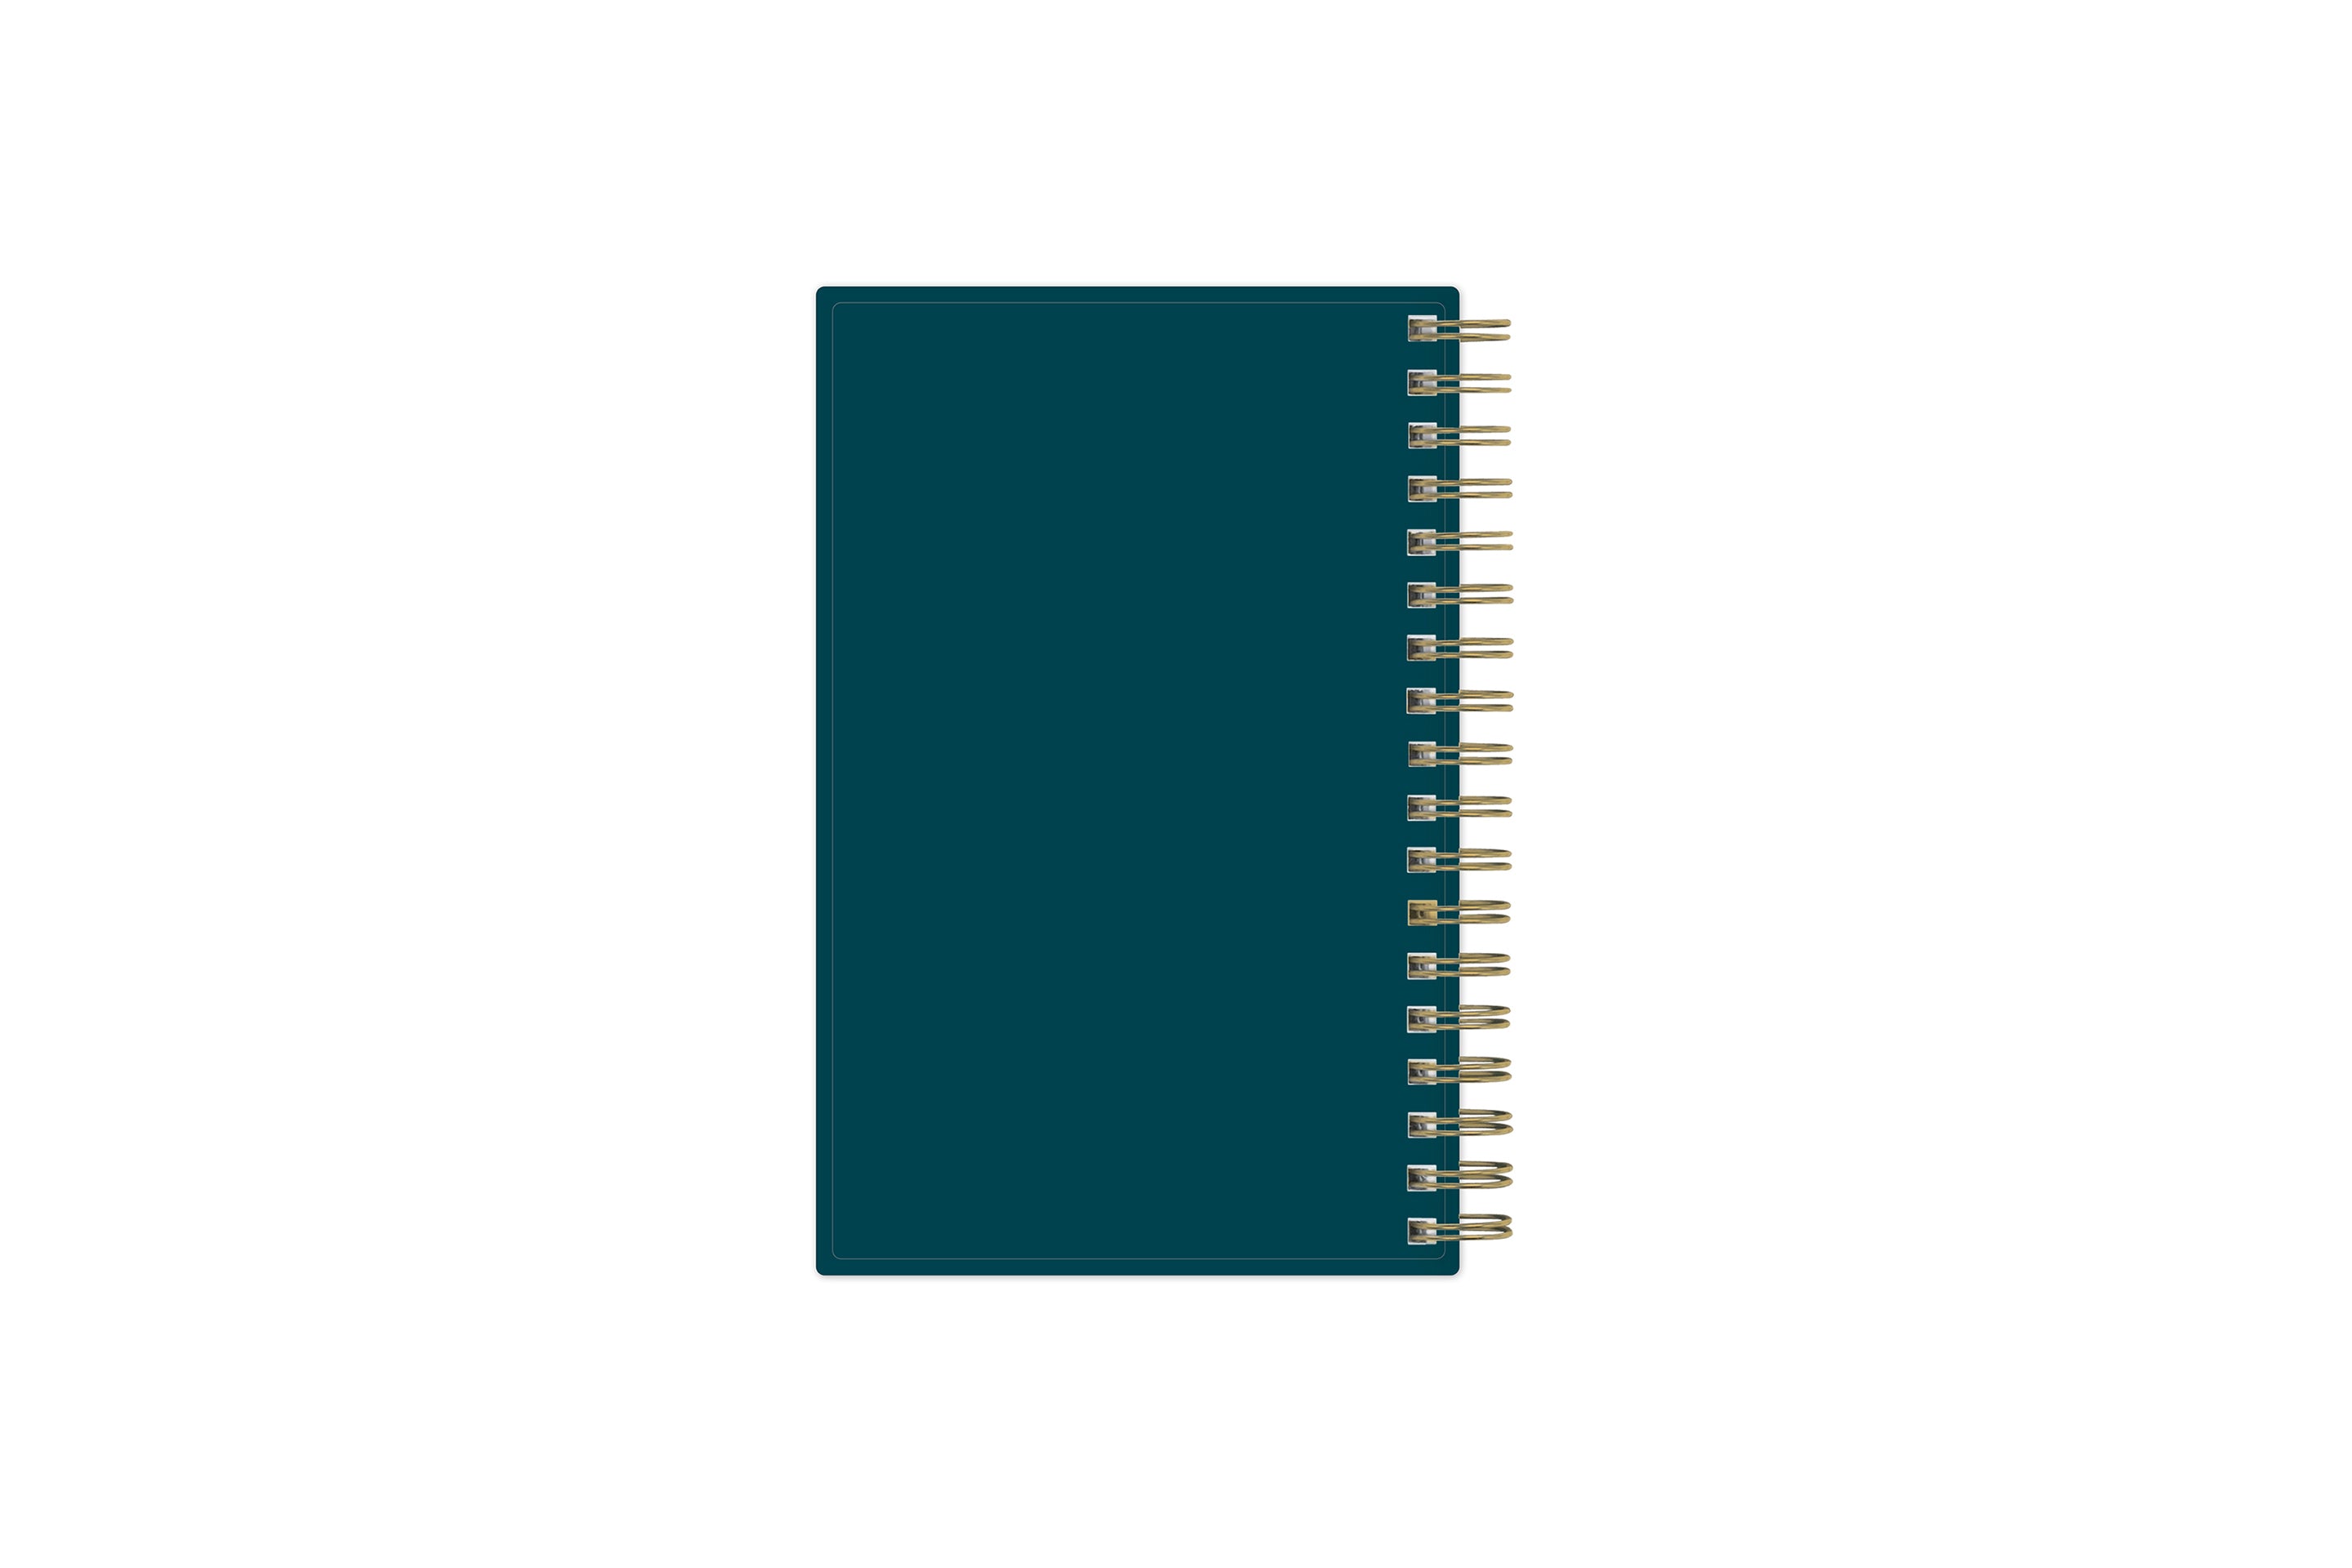 solid dark green blue back cover in a pocket sized 3.625x6.125